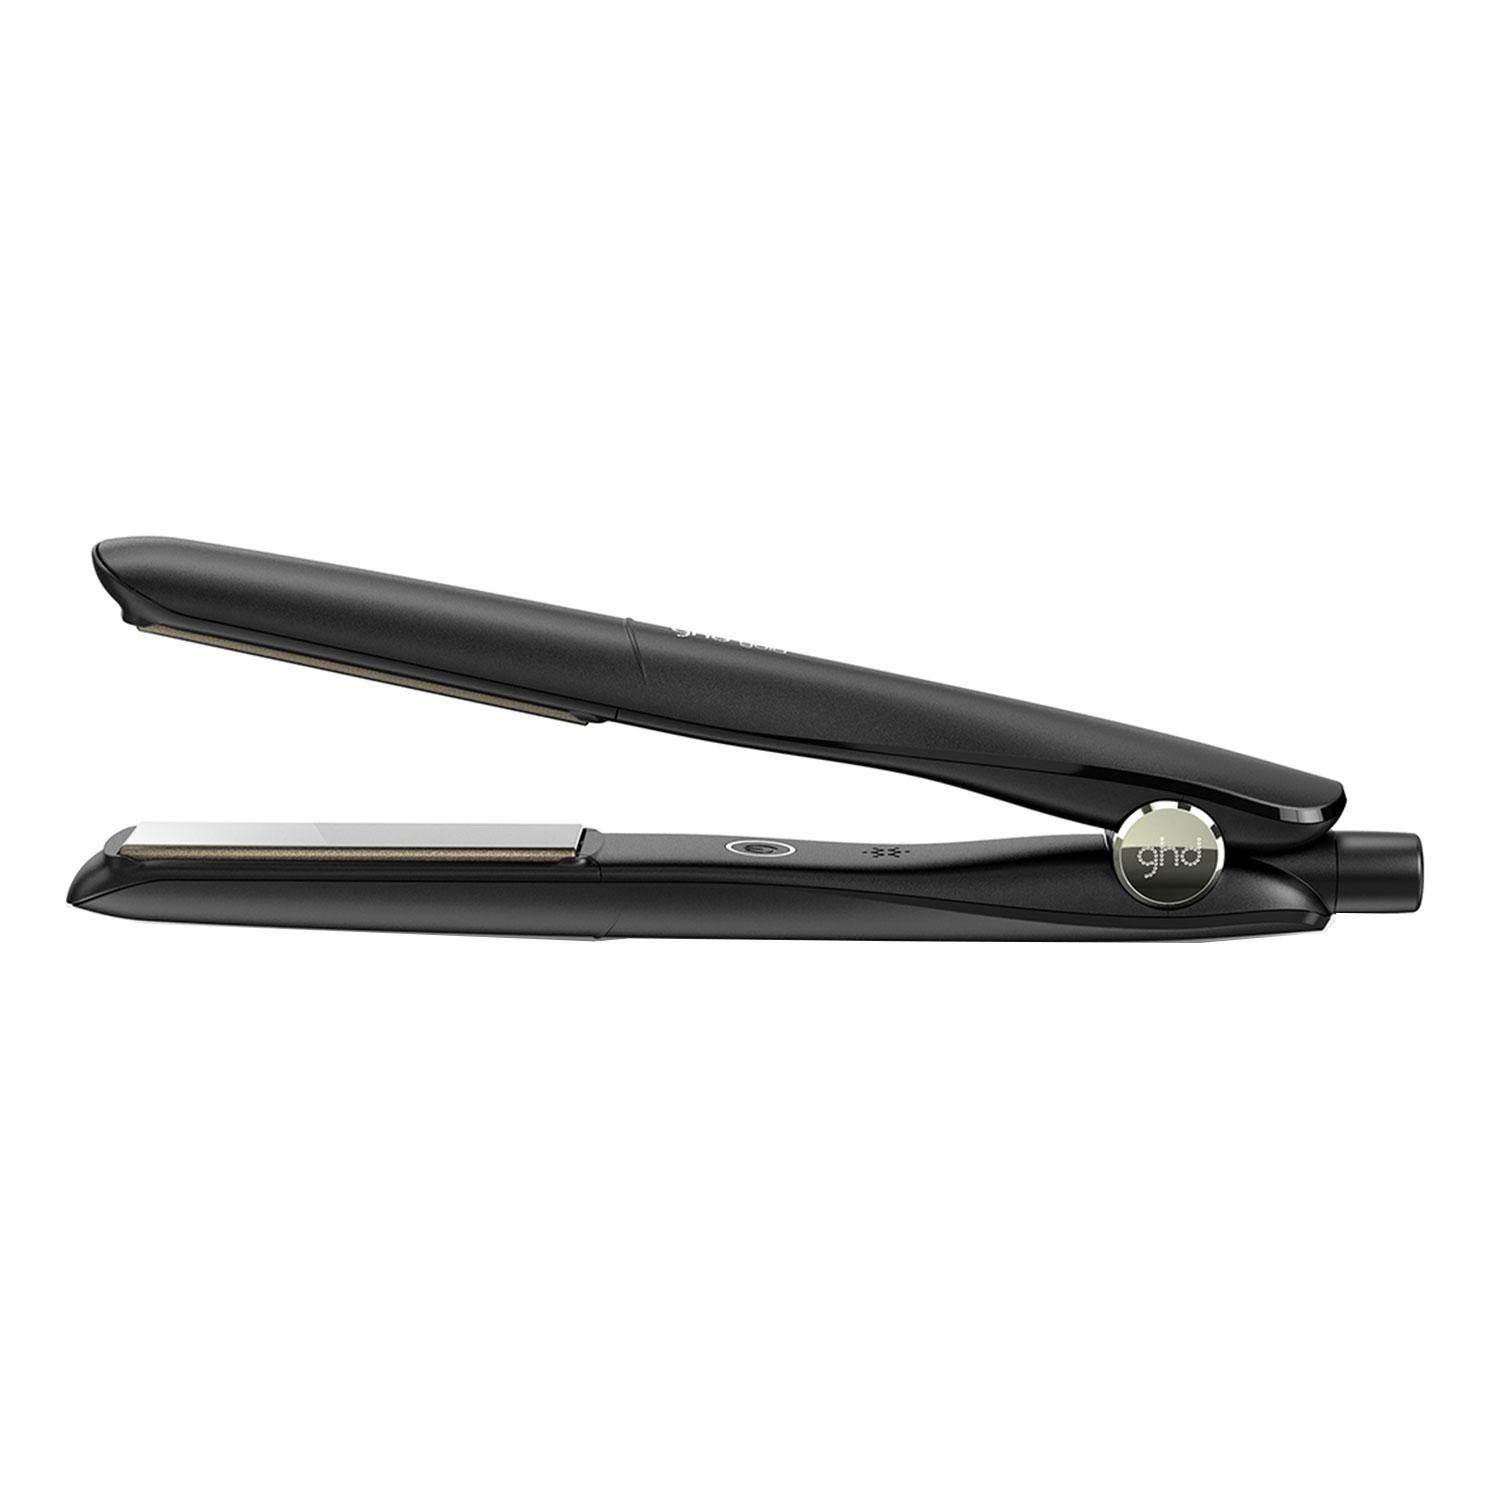 ghd Tools - Professional gold advanced styler